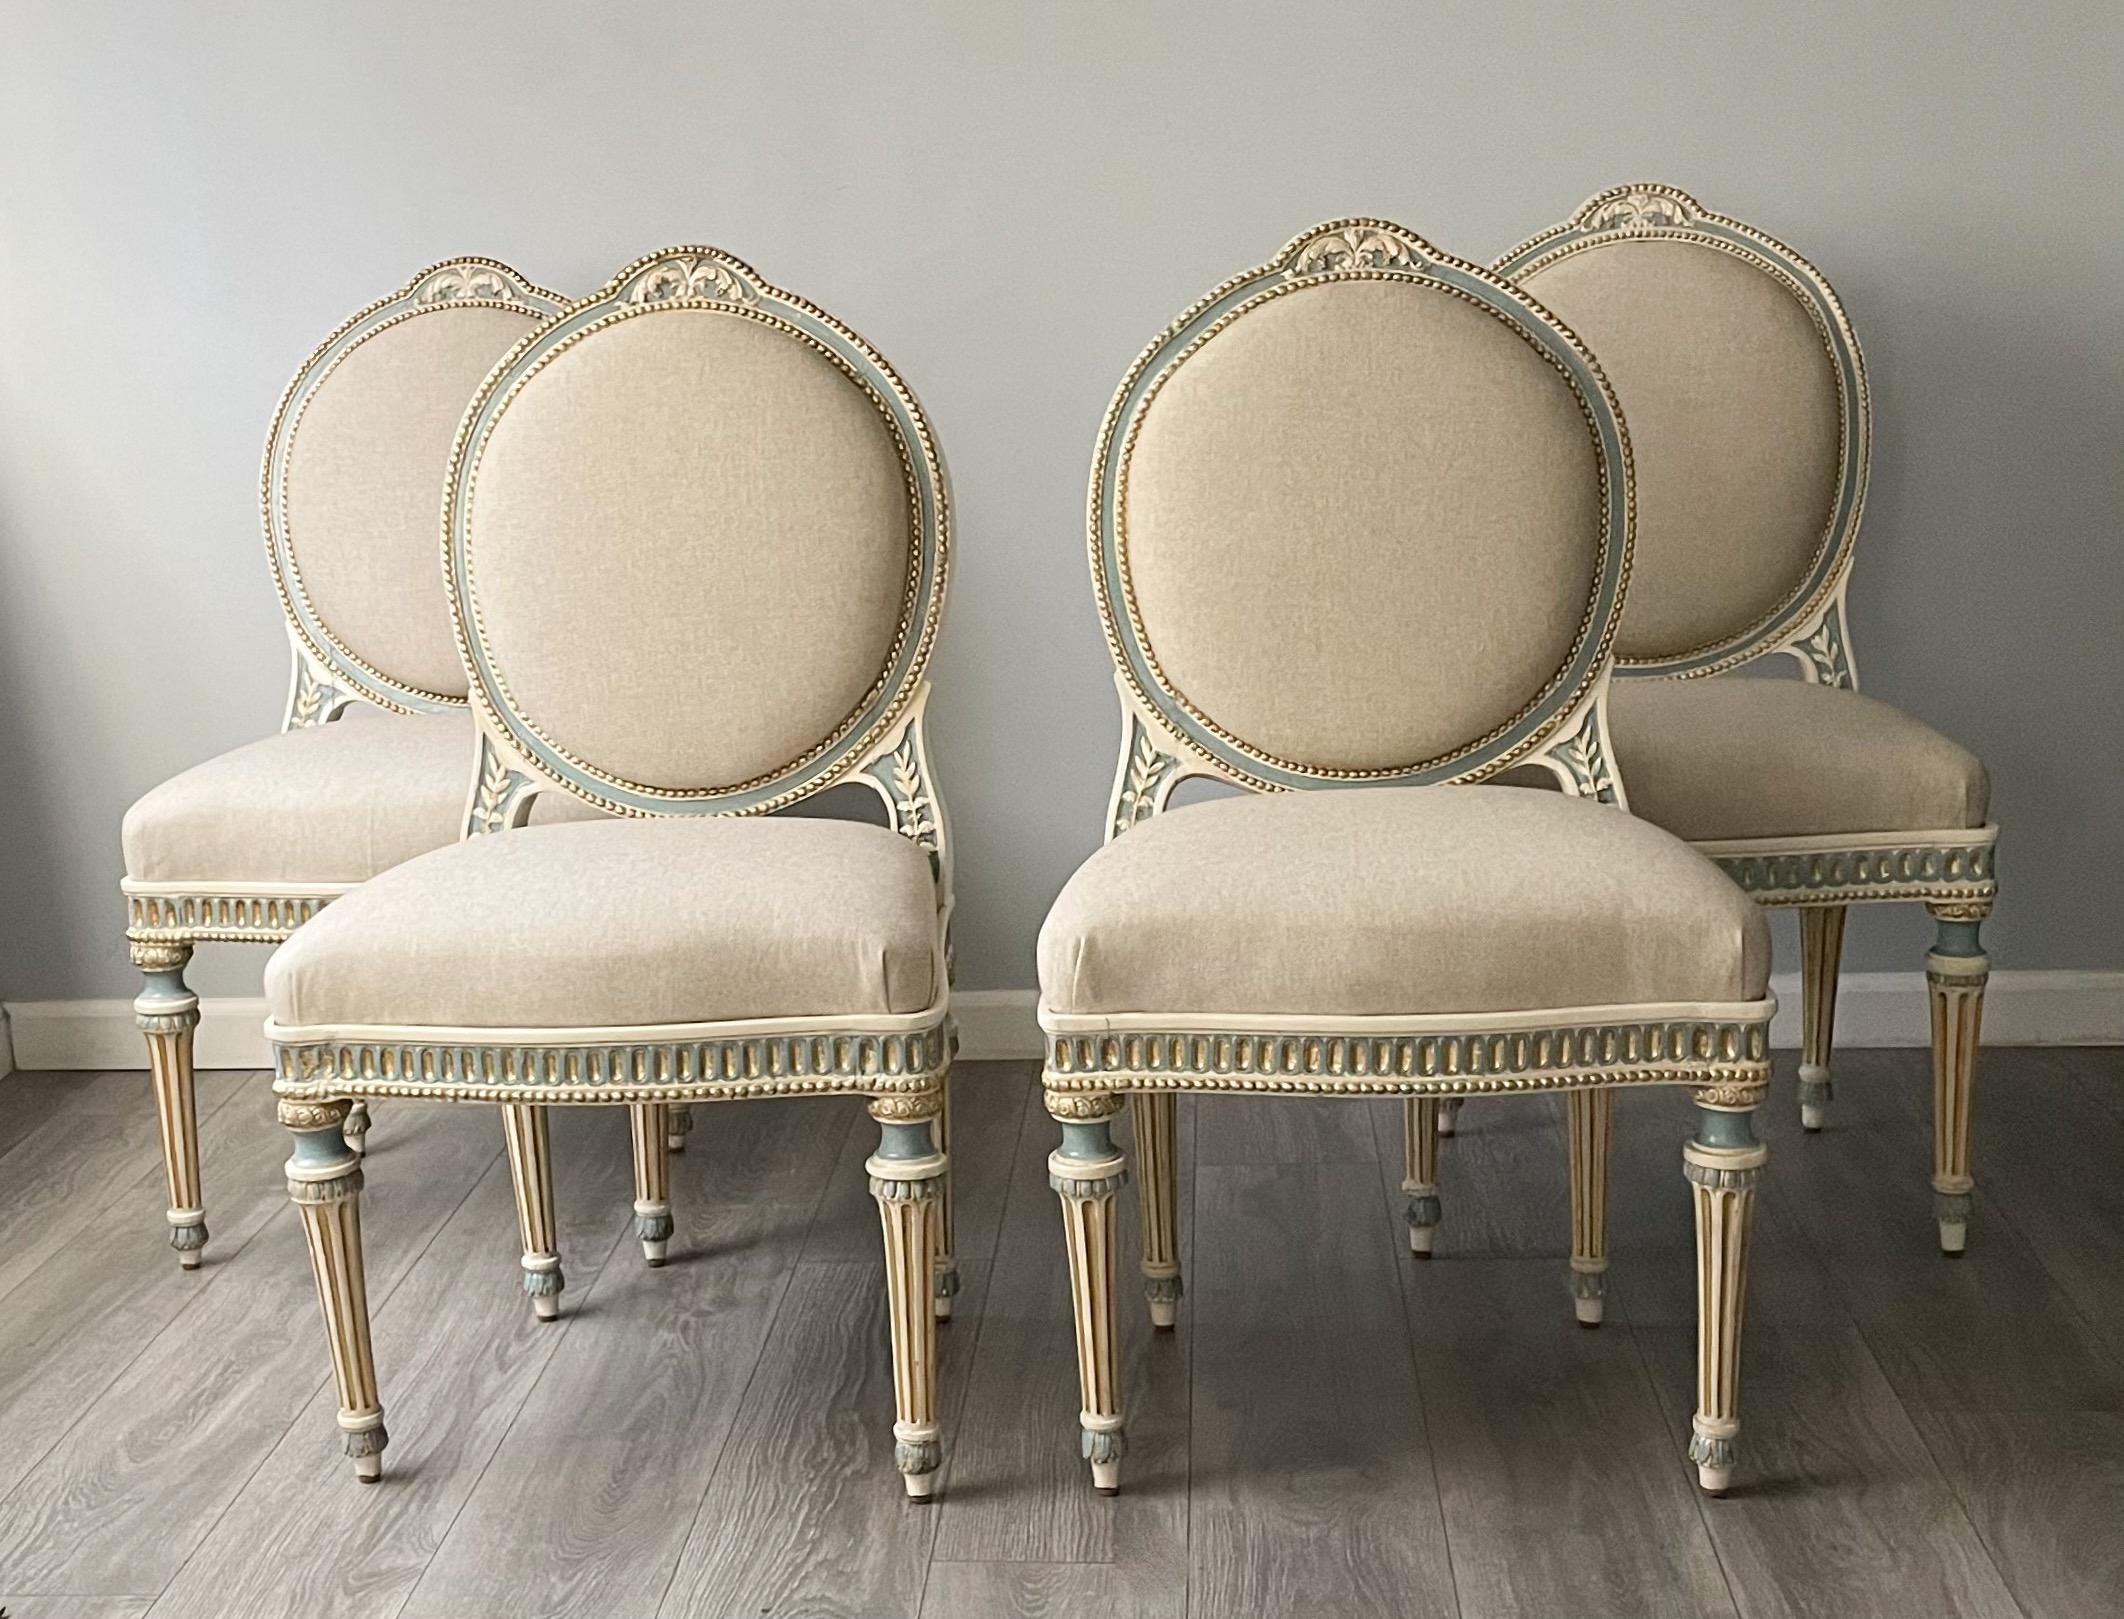 Gorgeous, French 19th C, set of 4 painted and parcel-gilt dining/side chairs chairs in the Louis XVI style.

The chairs feature detailed carved and painted decorations throughout with new cotton linen upholstery. 

Condition: Minor paint loss and